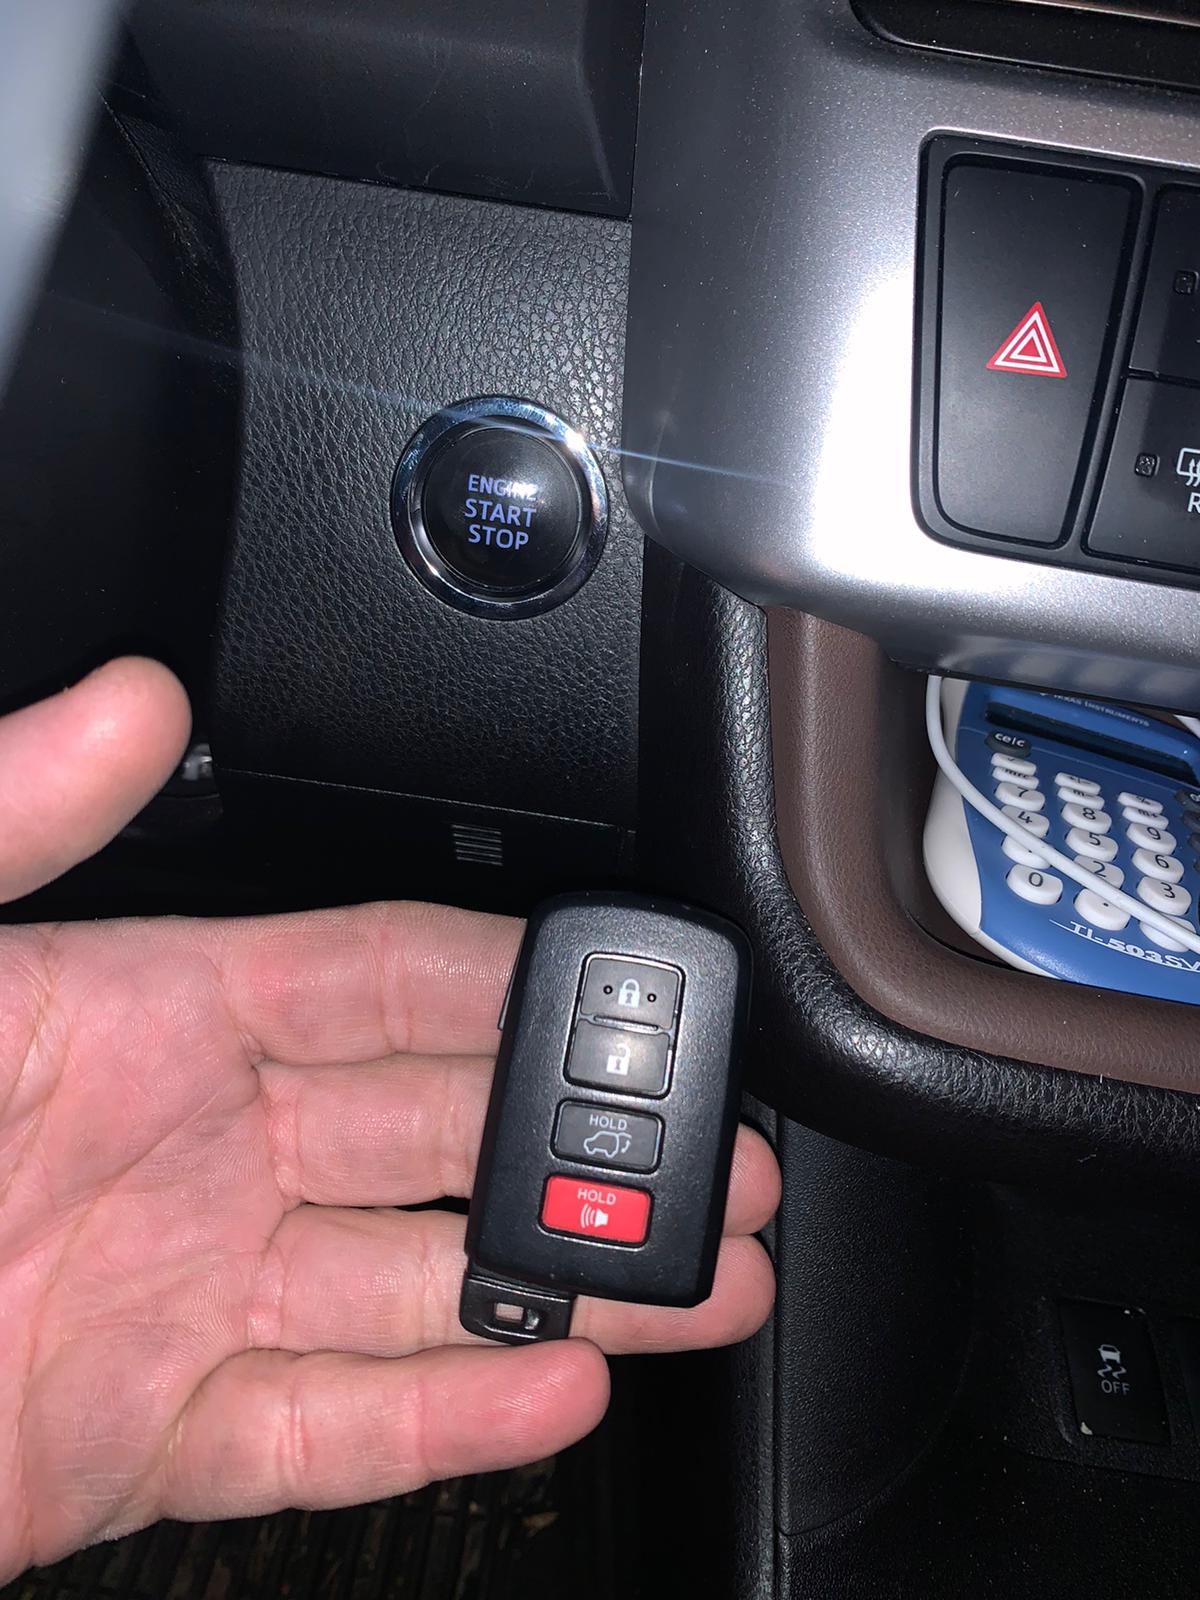 Toyota Starlet Replacement Keys What To Do, Options